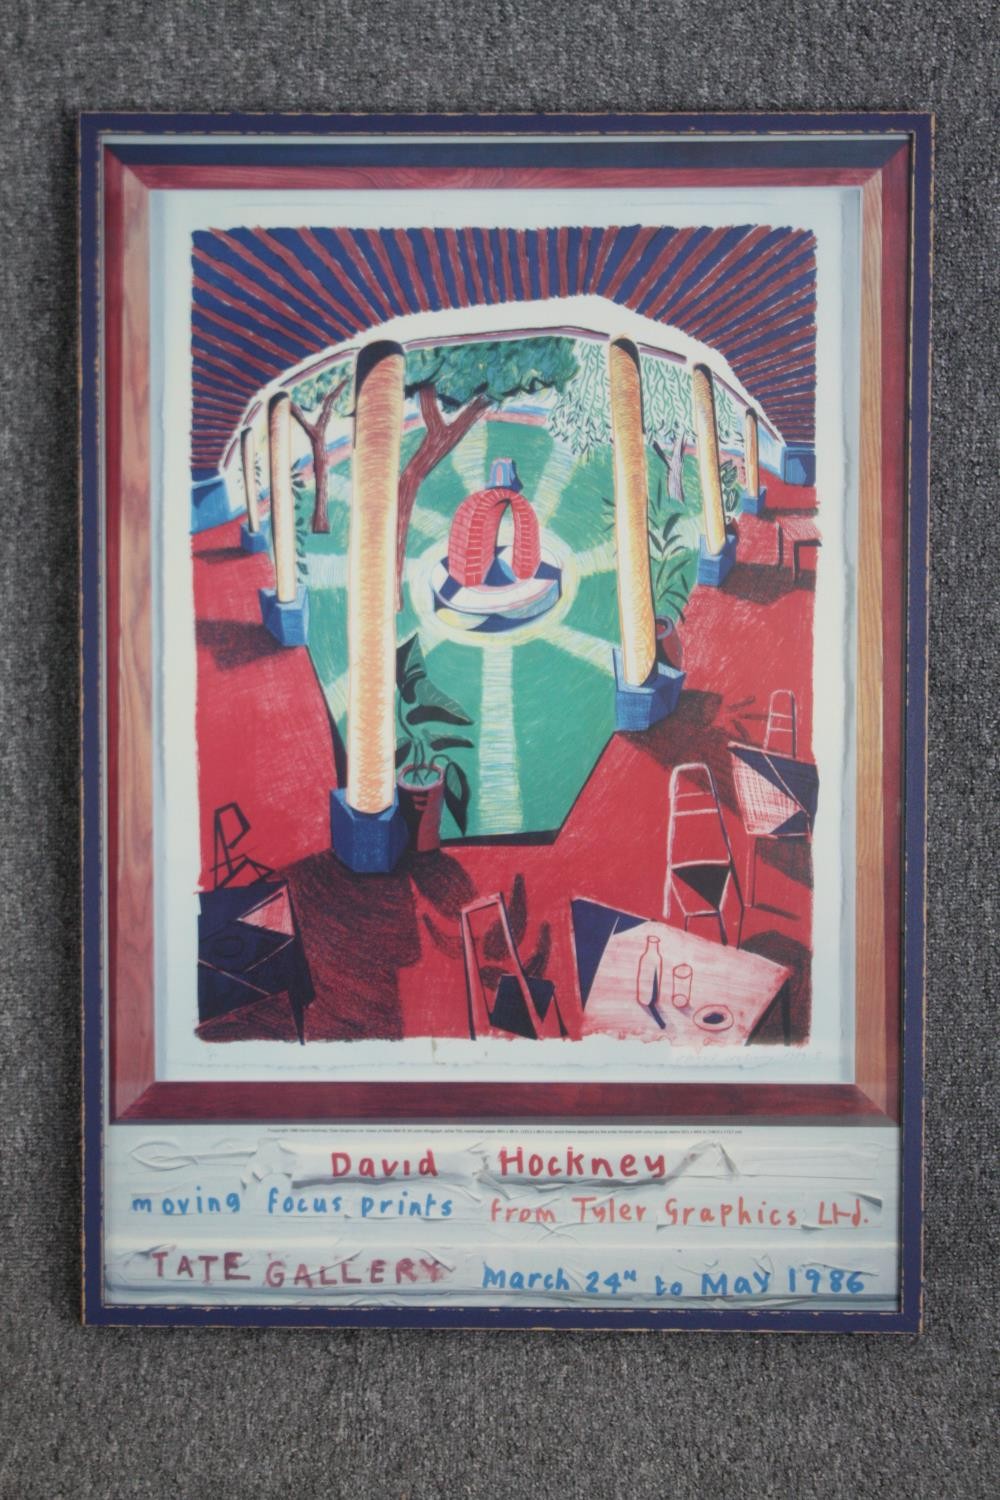 David Hockney. Exhibition published. Printed 1986 by the Tate Gallery for the 'Moving Focus Prints